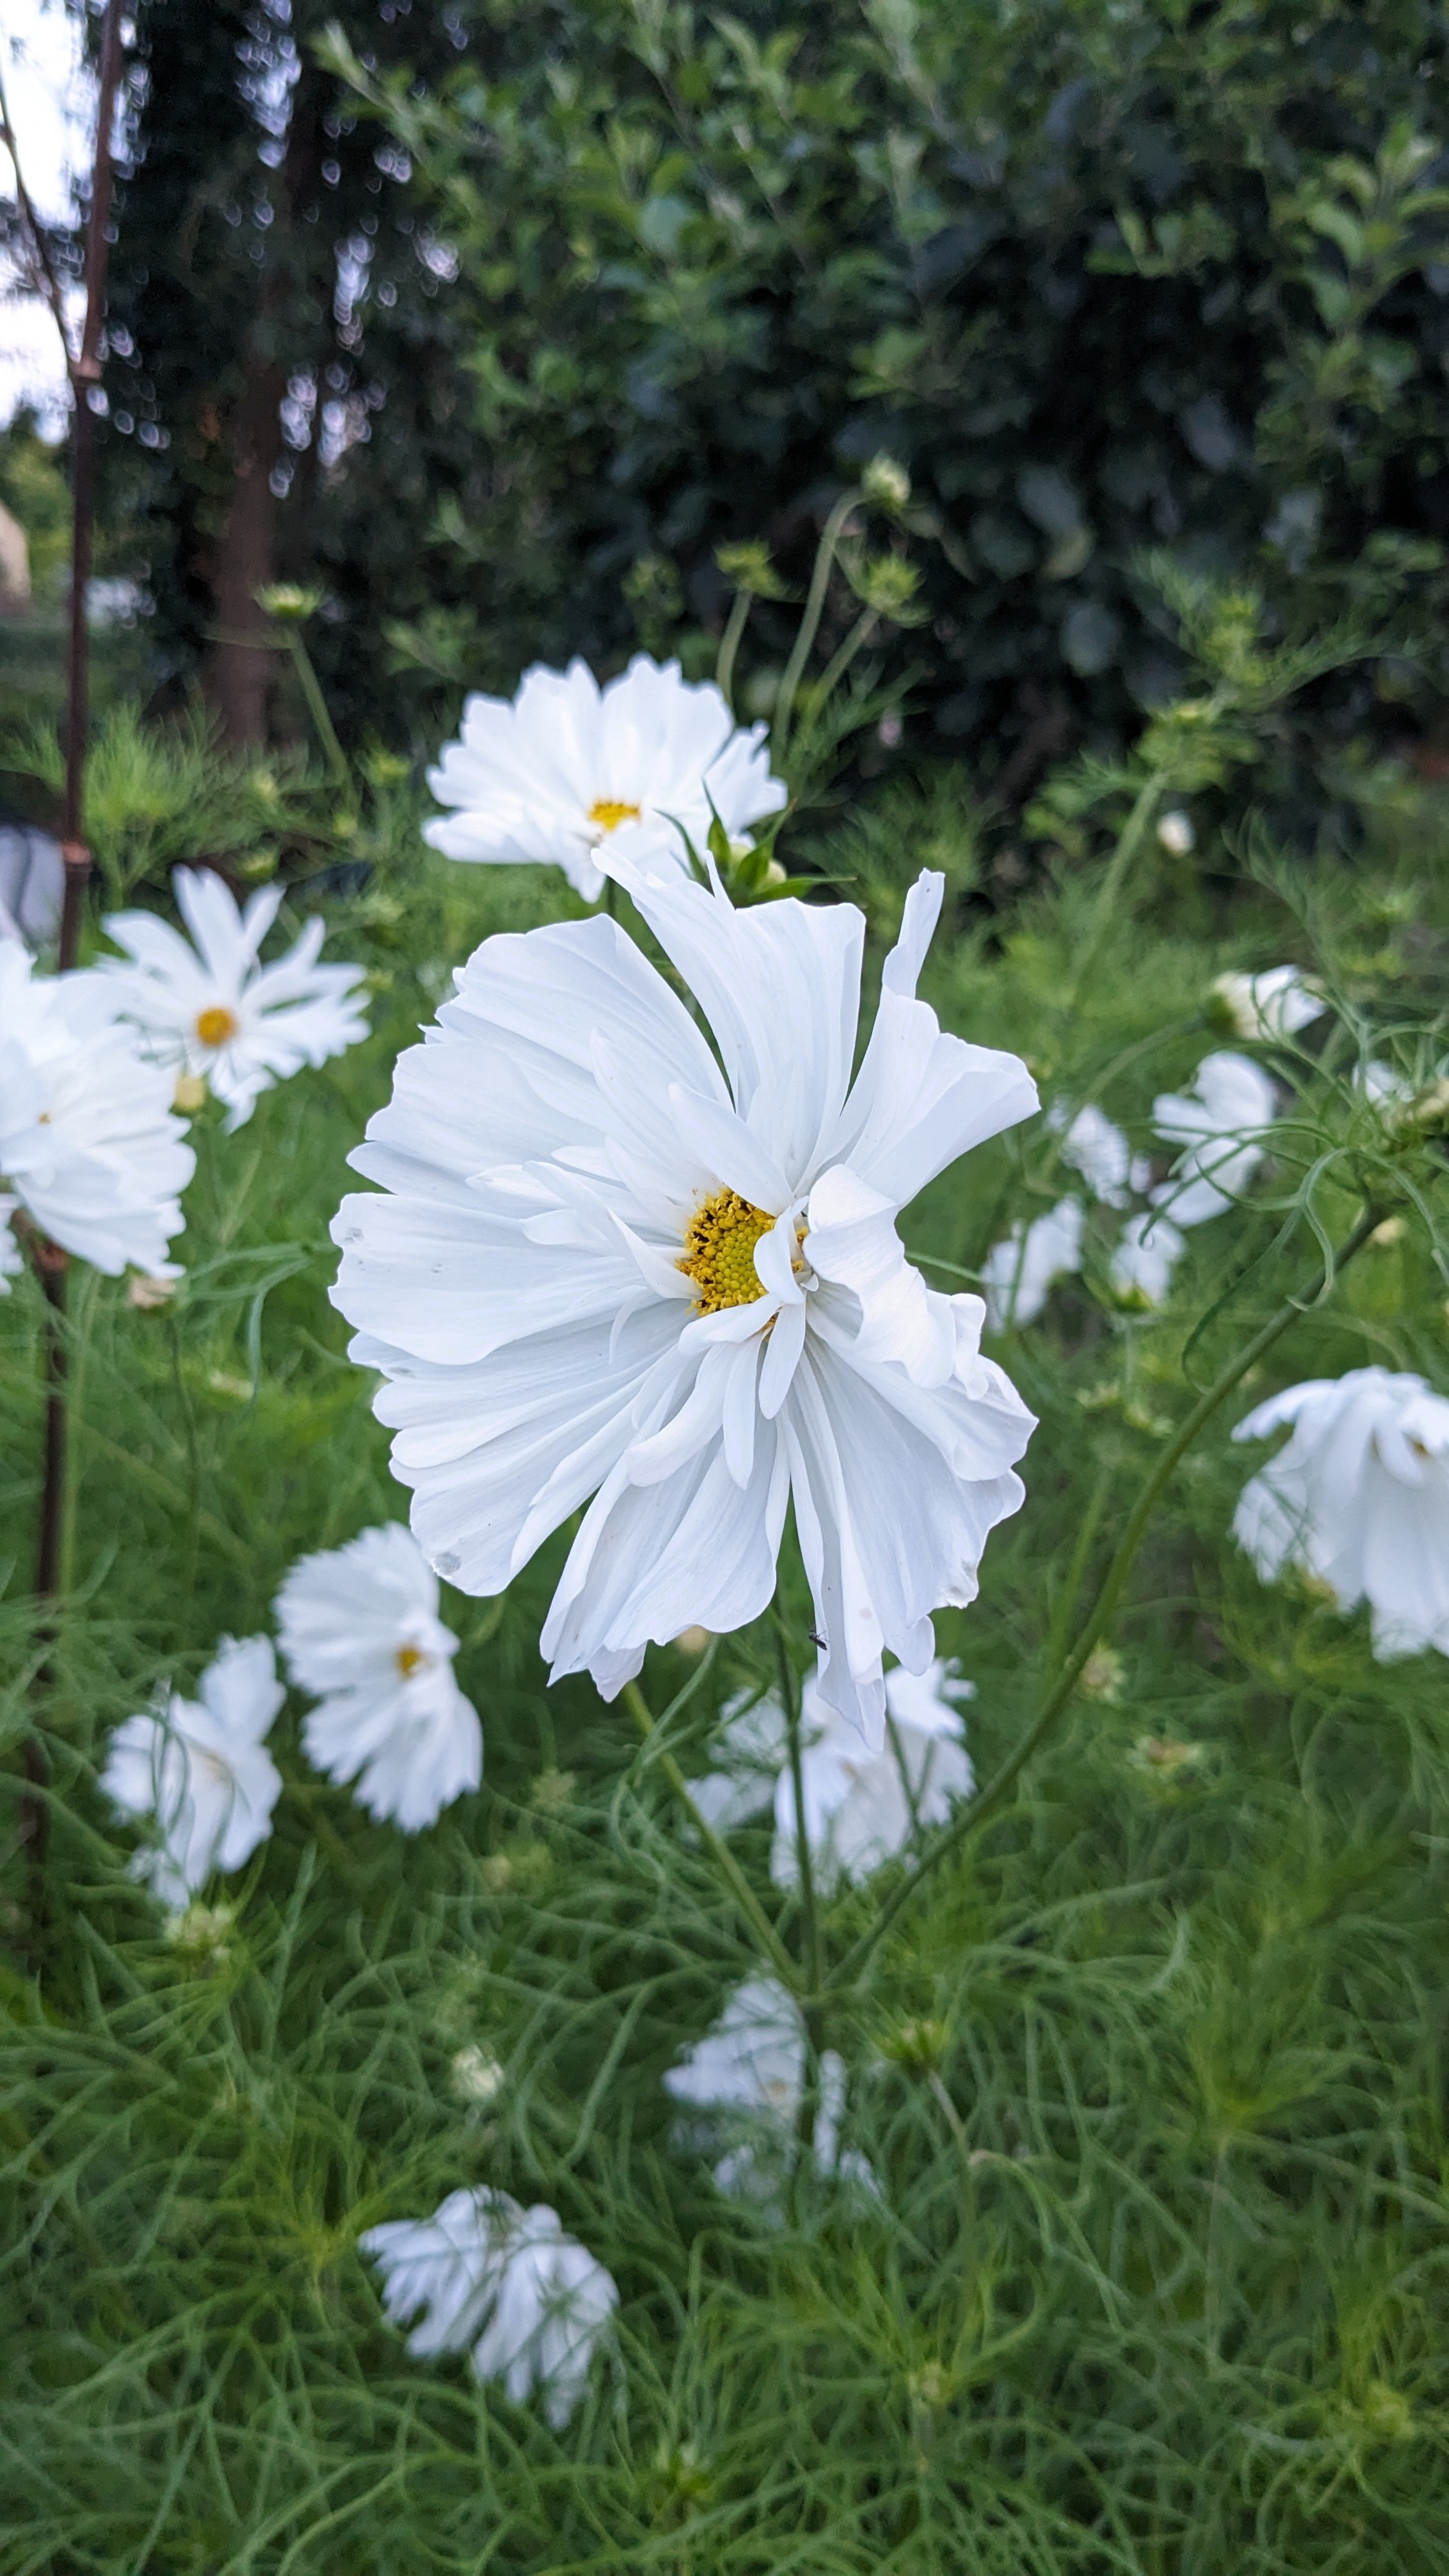 Cosmos 'Fizzy White' still blooming in late September